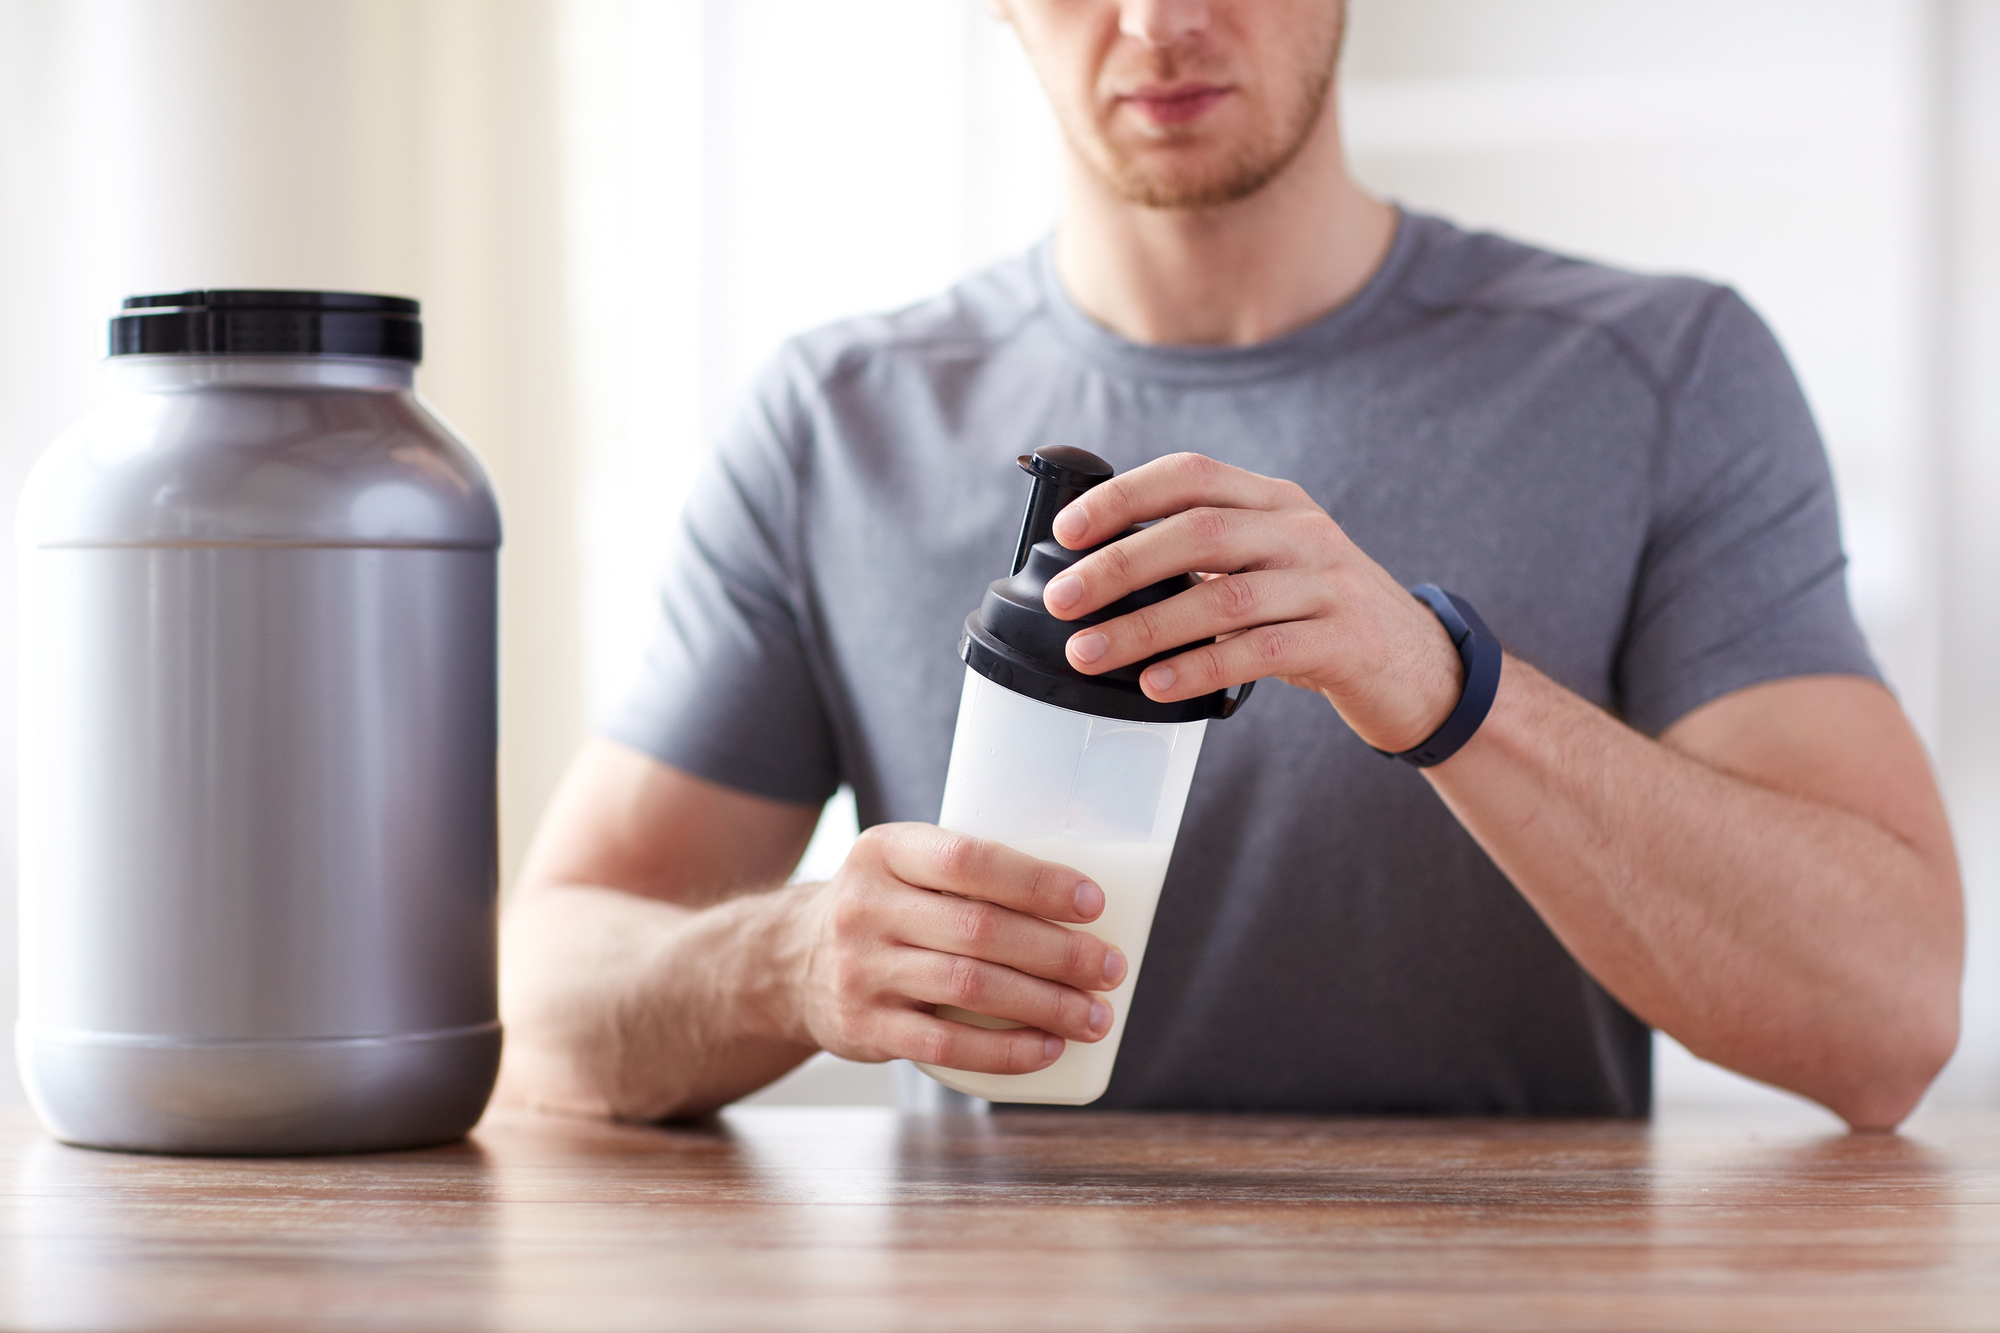 Man holding his shaker bottle with a jar of creatine next to him on a wooden table